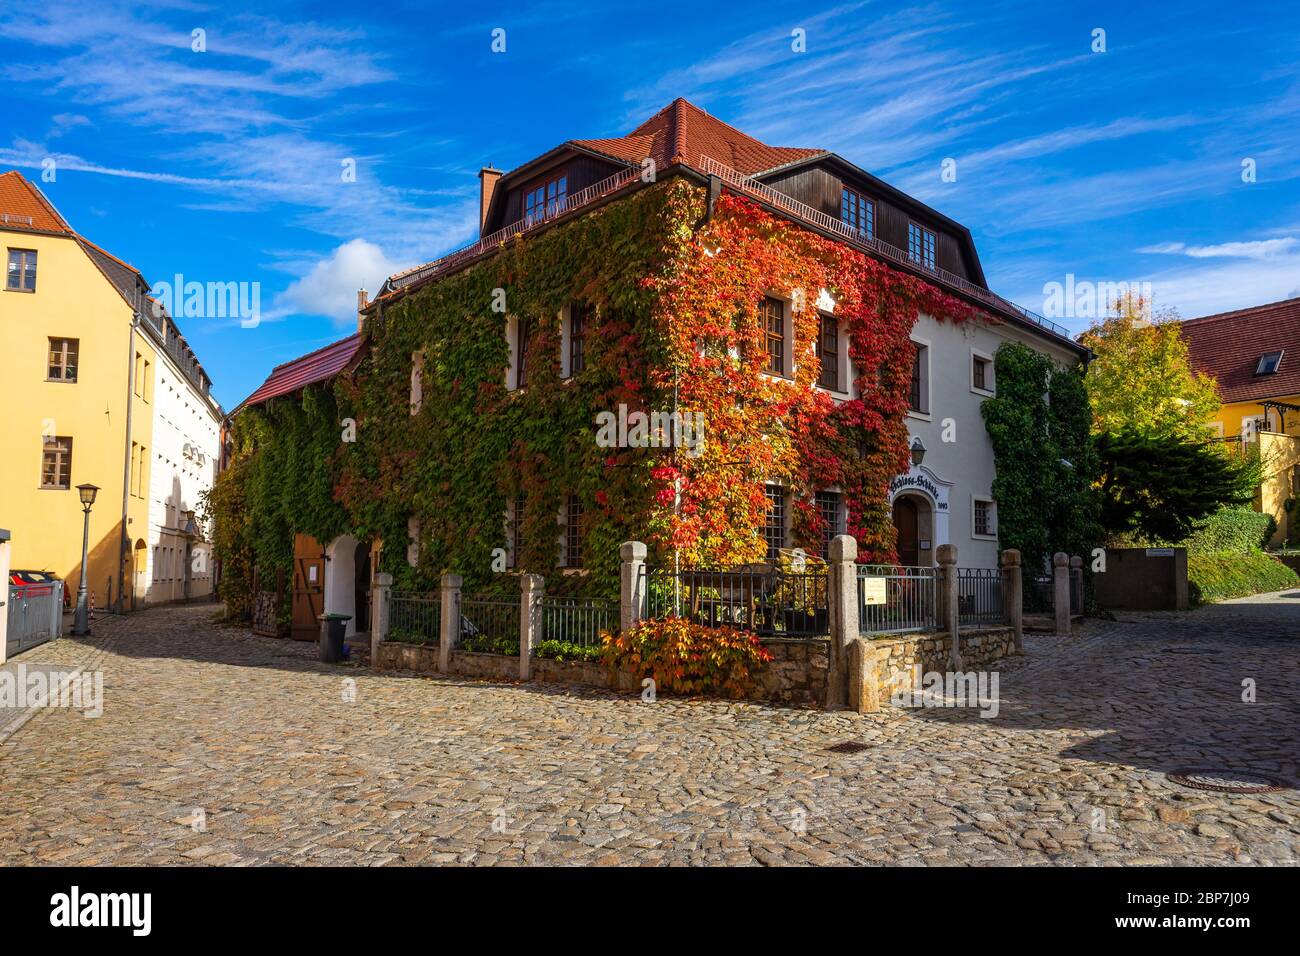 BAUTZEN, GERMANY - OCTOBER 10, 2019: Beautiful streets of the historical part of the old town in a fall day. A house twined with ivy. Stock Photo